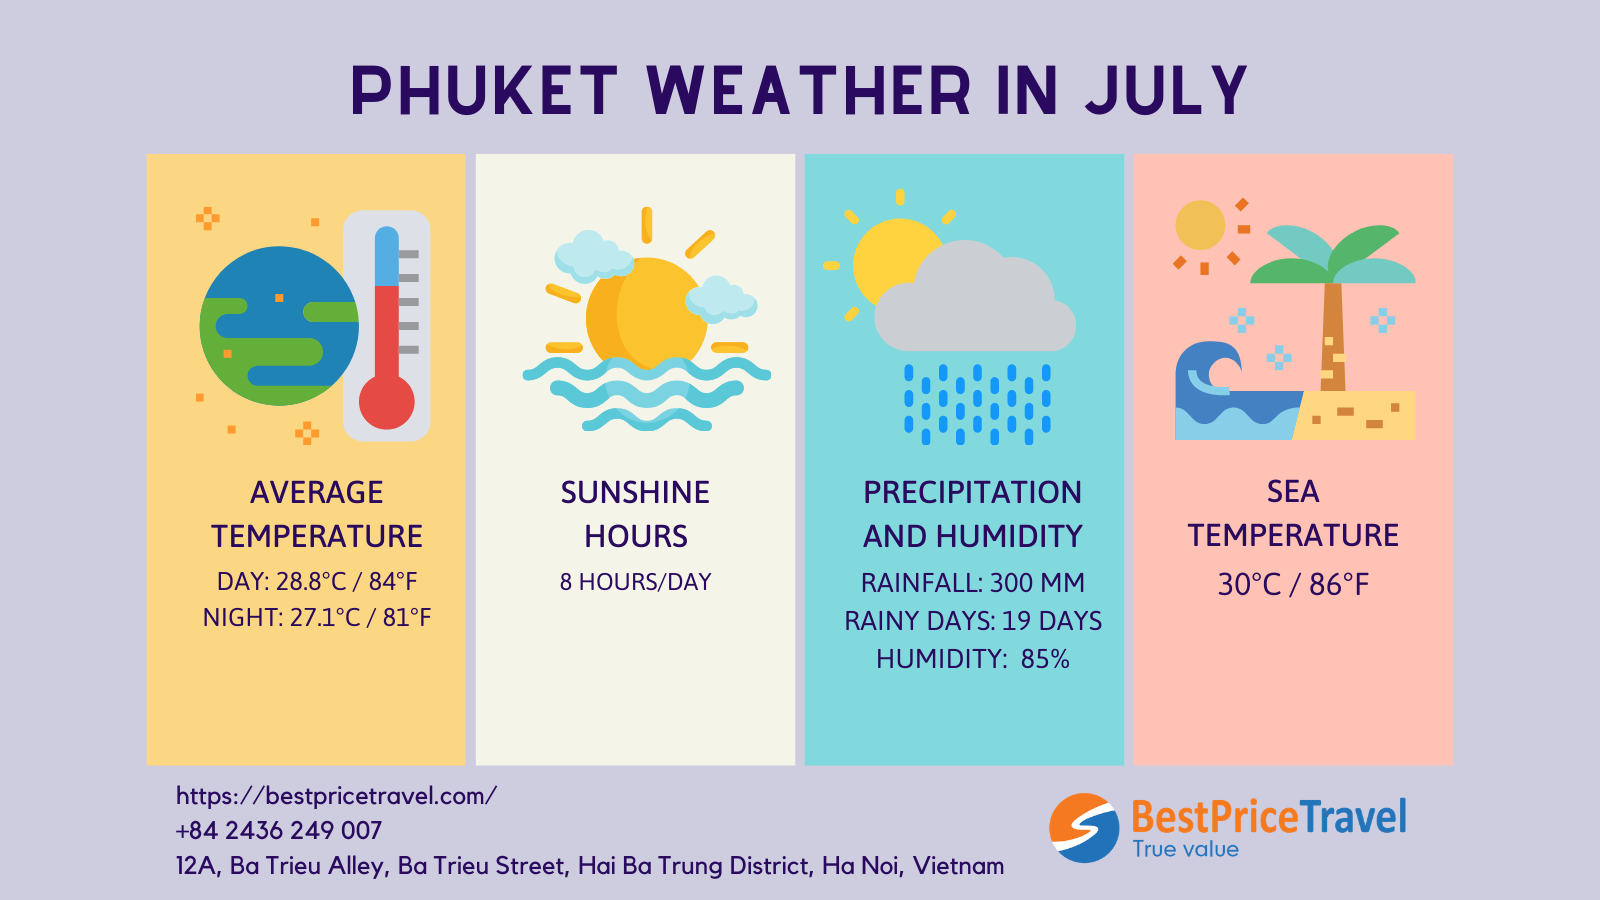 Phuket weather in July